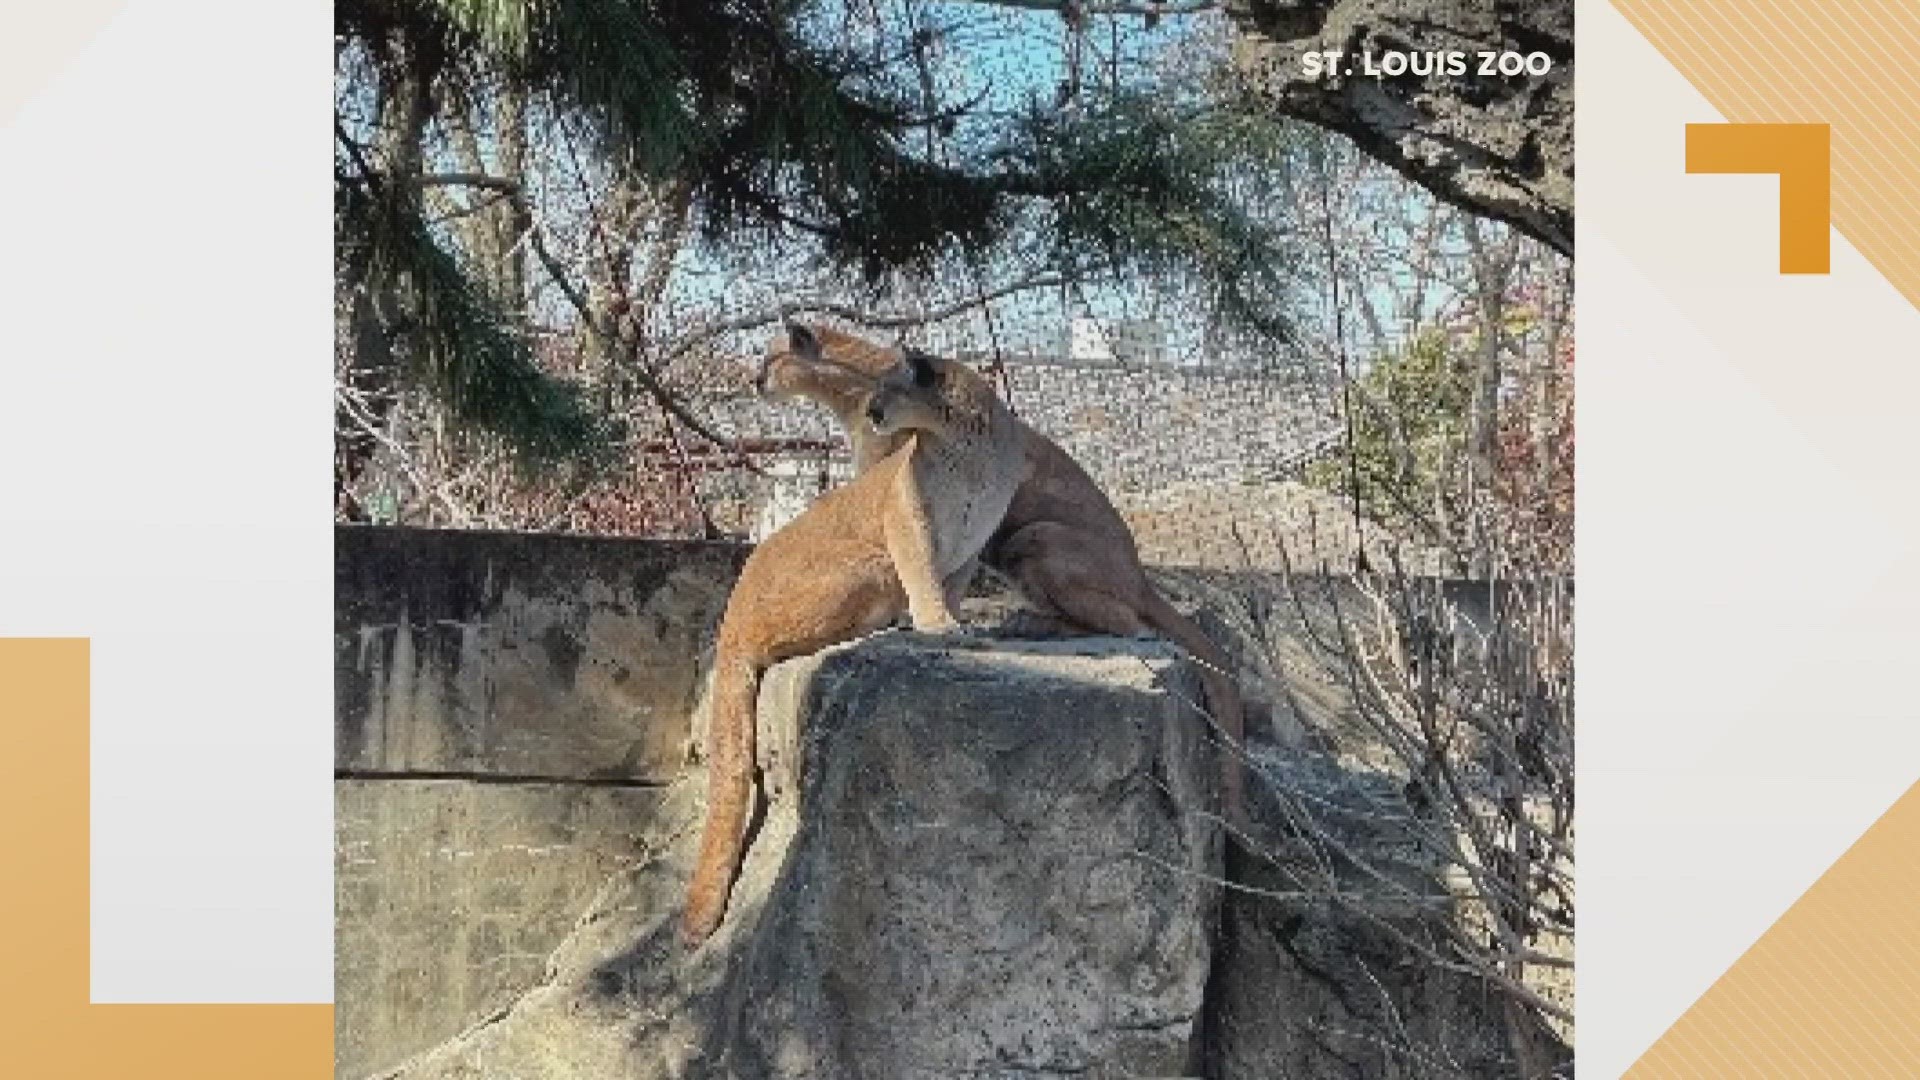 Russet and Yukon were found in the wilds in Idaho after being orphaned and were saved as cubs. The sibling pair are the newest additions to the Saint Louis Zoo.